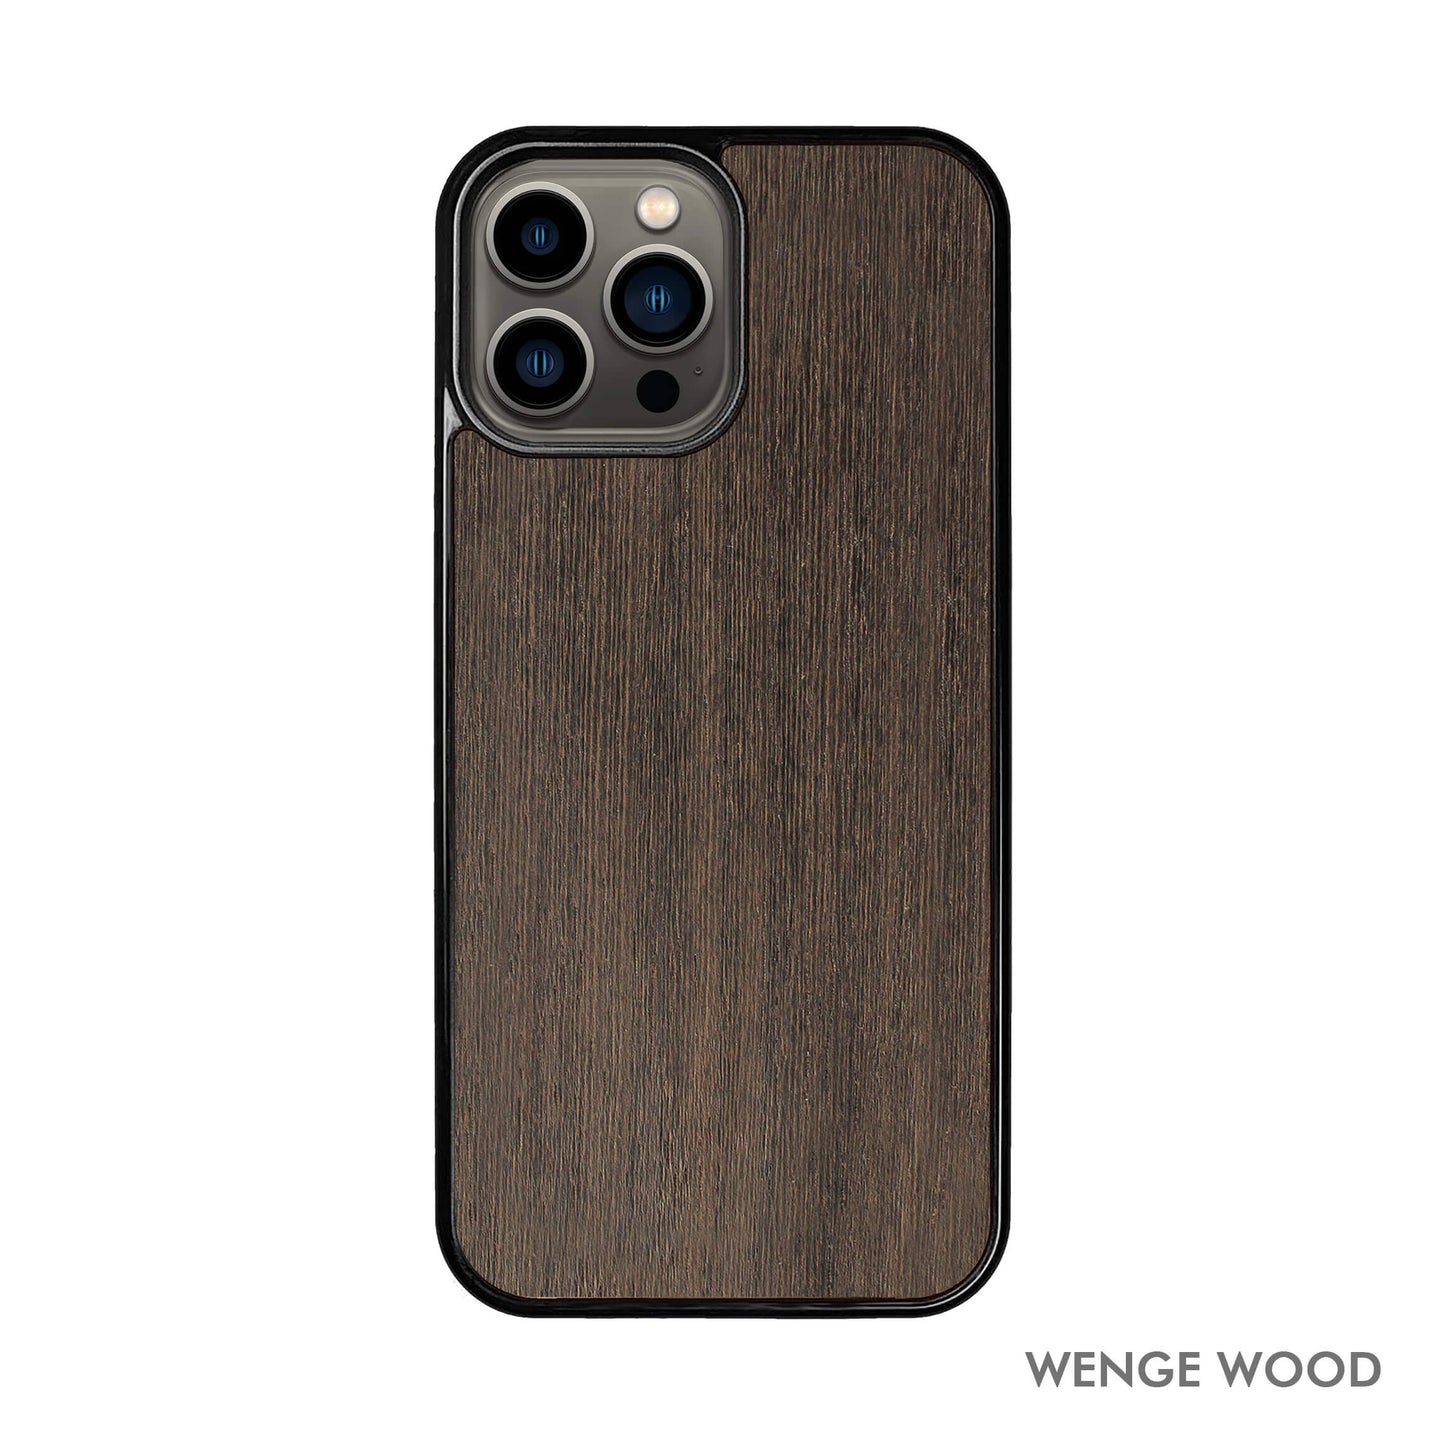 Real Wood iPhone Case